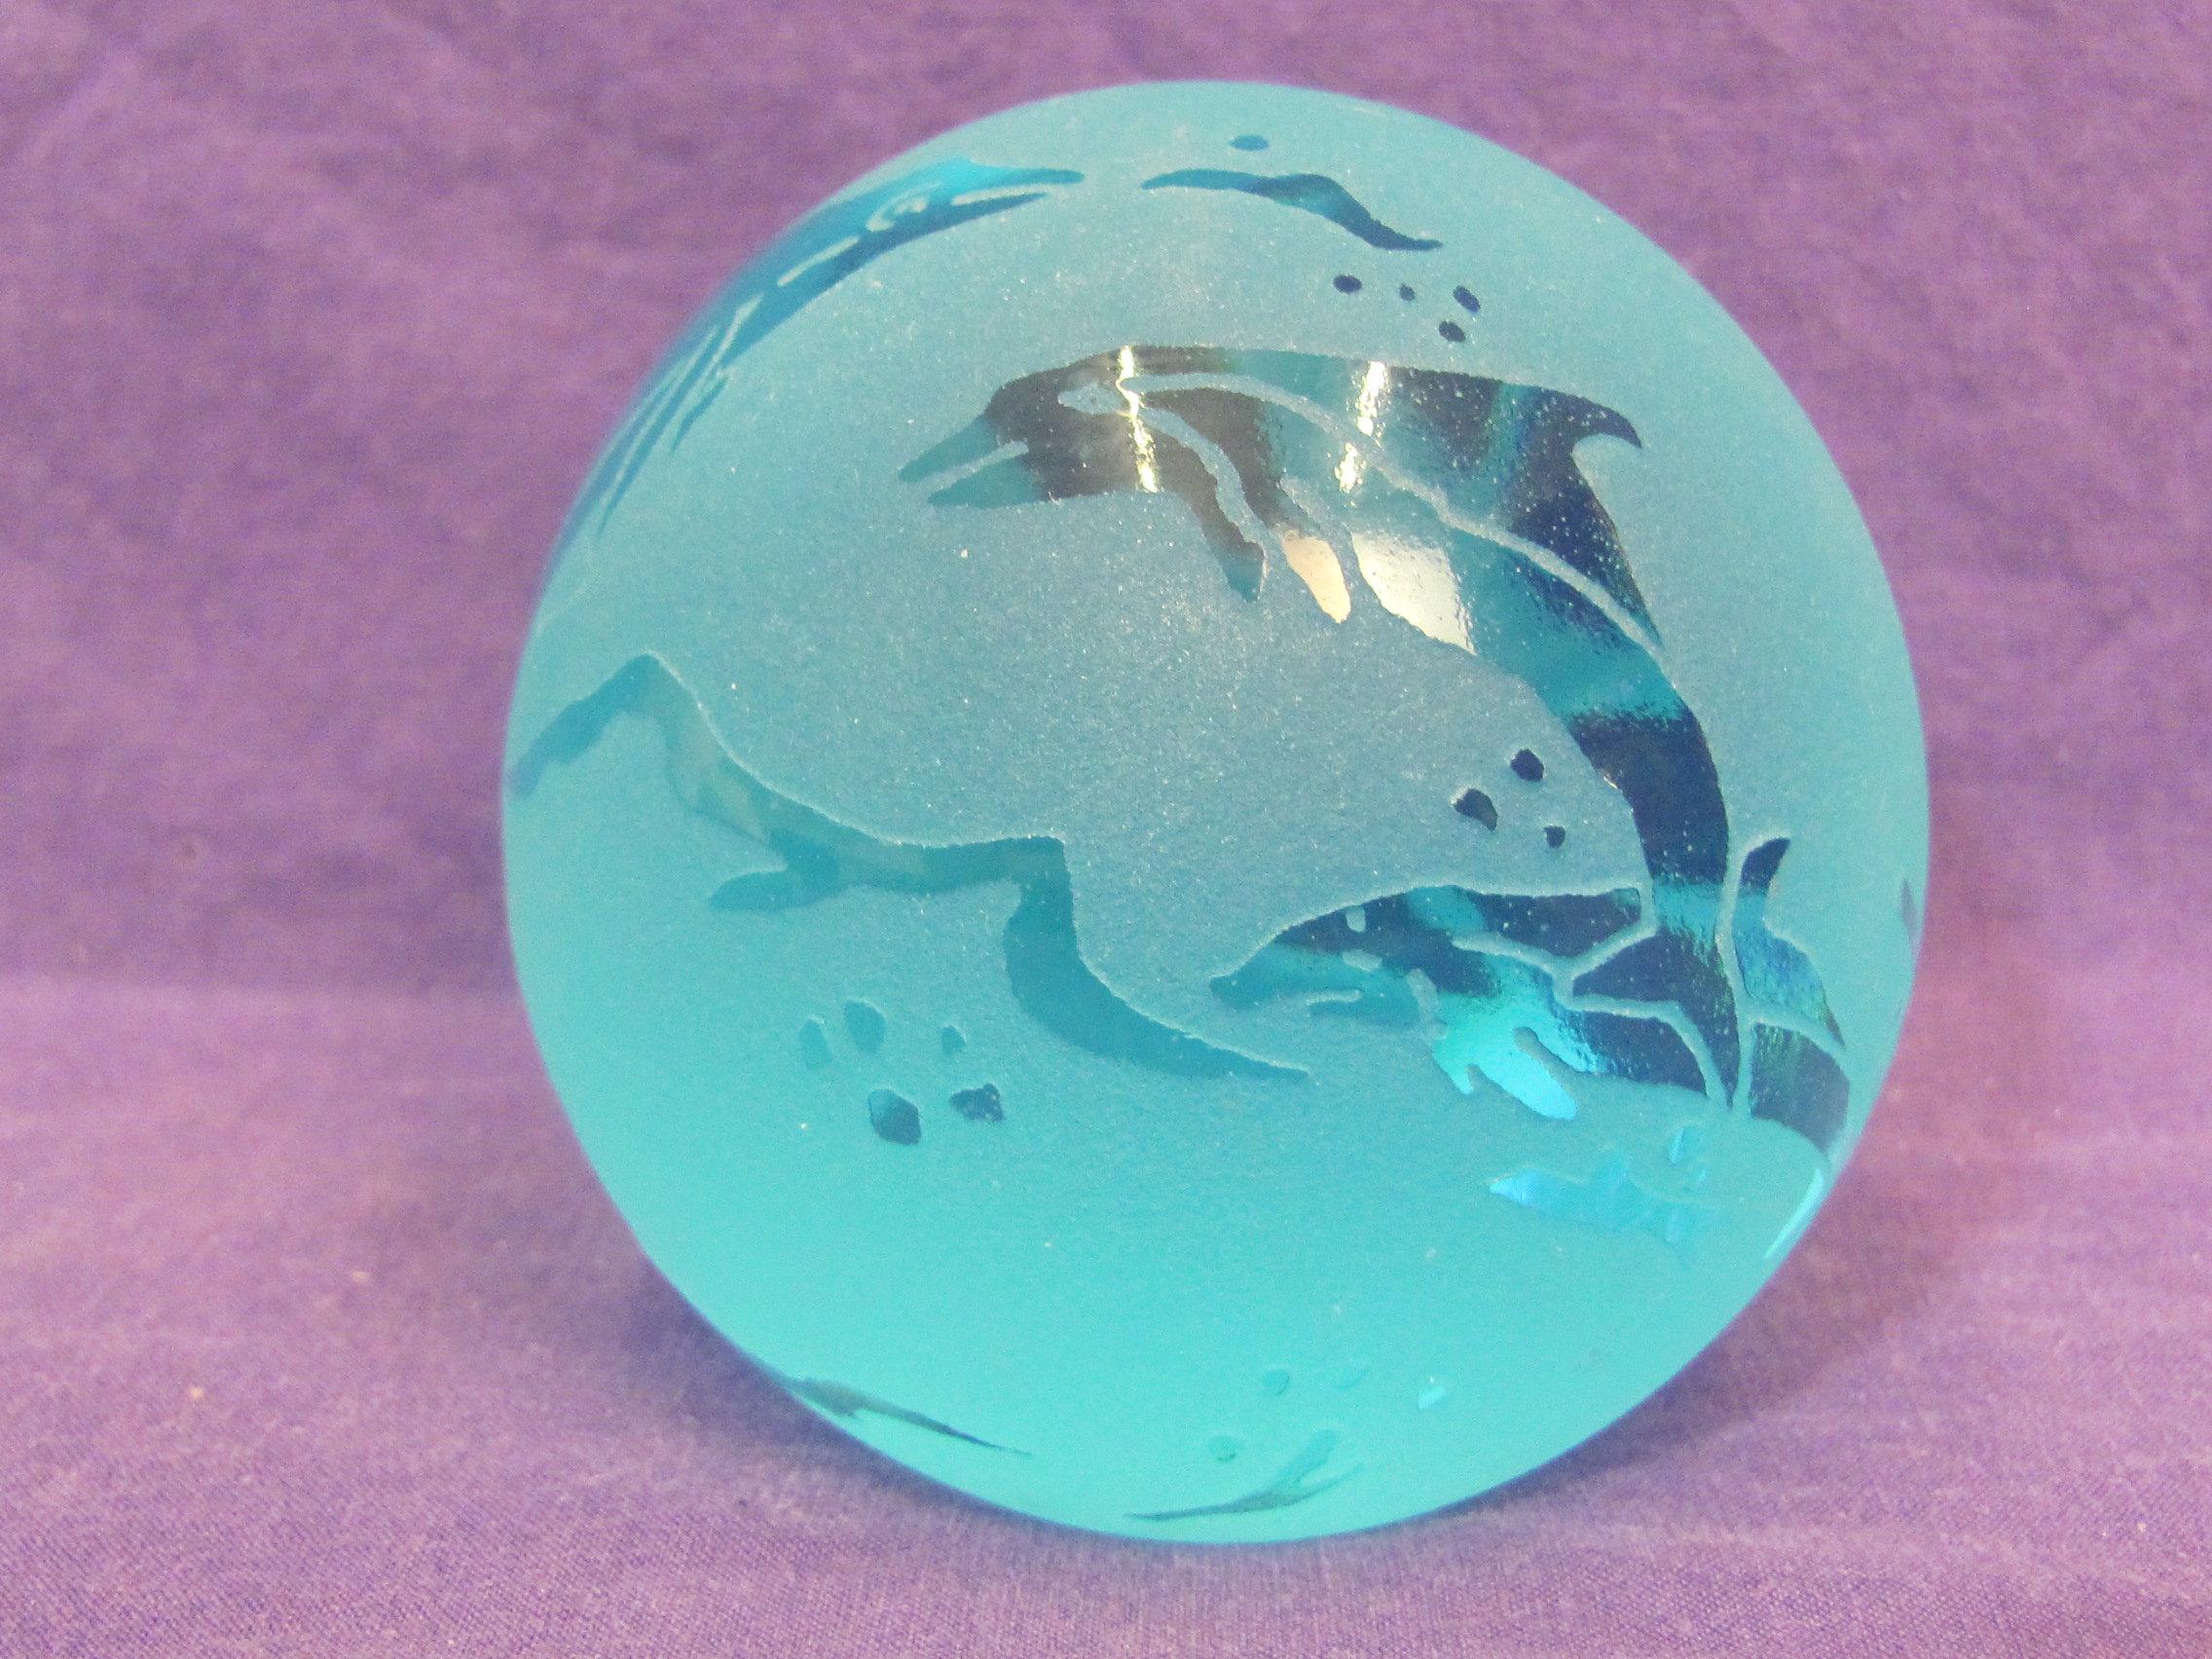 2 Blue Glass Paperweights – Frosted one w Fish & Dolphins – Crackle Glass Shaped like an Apple